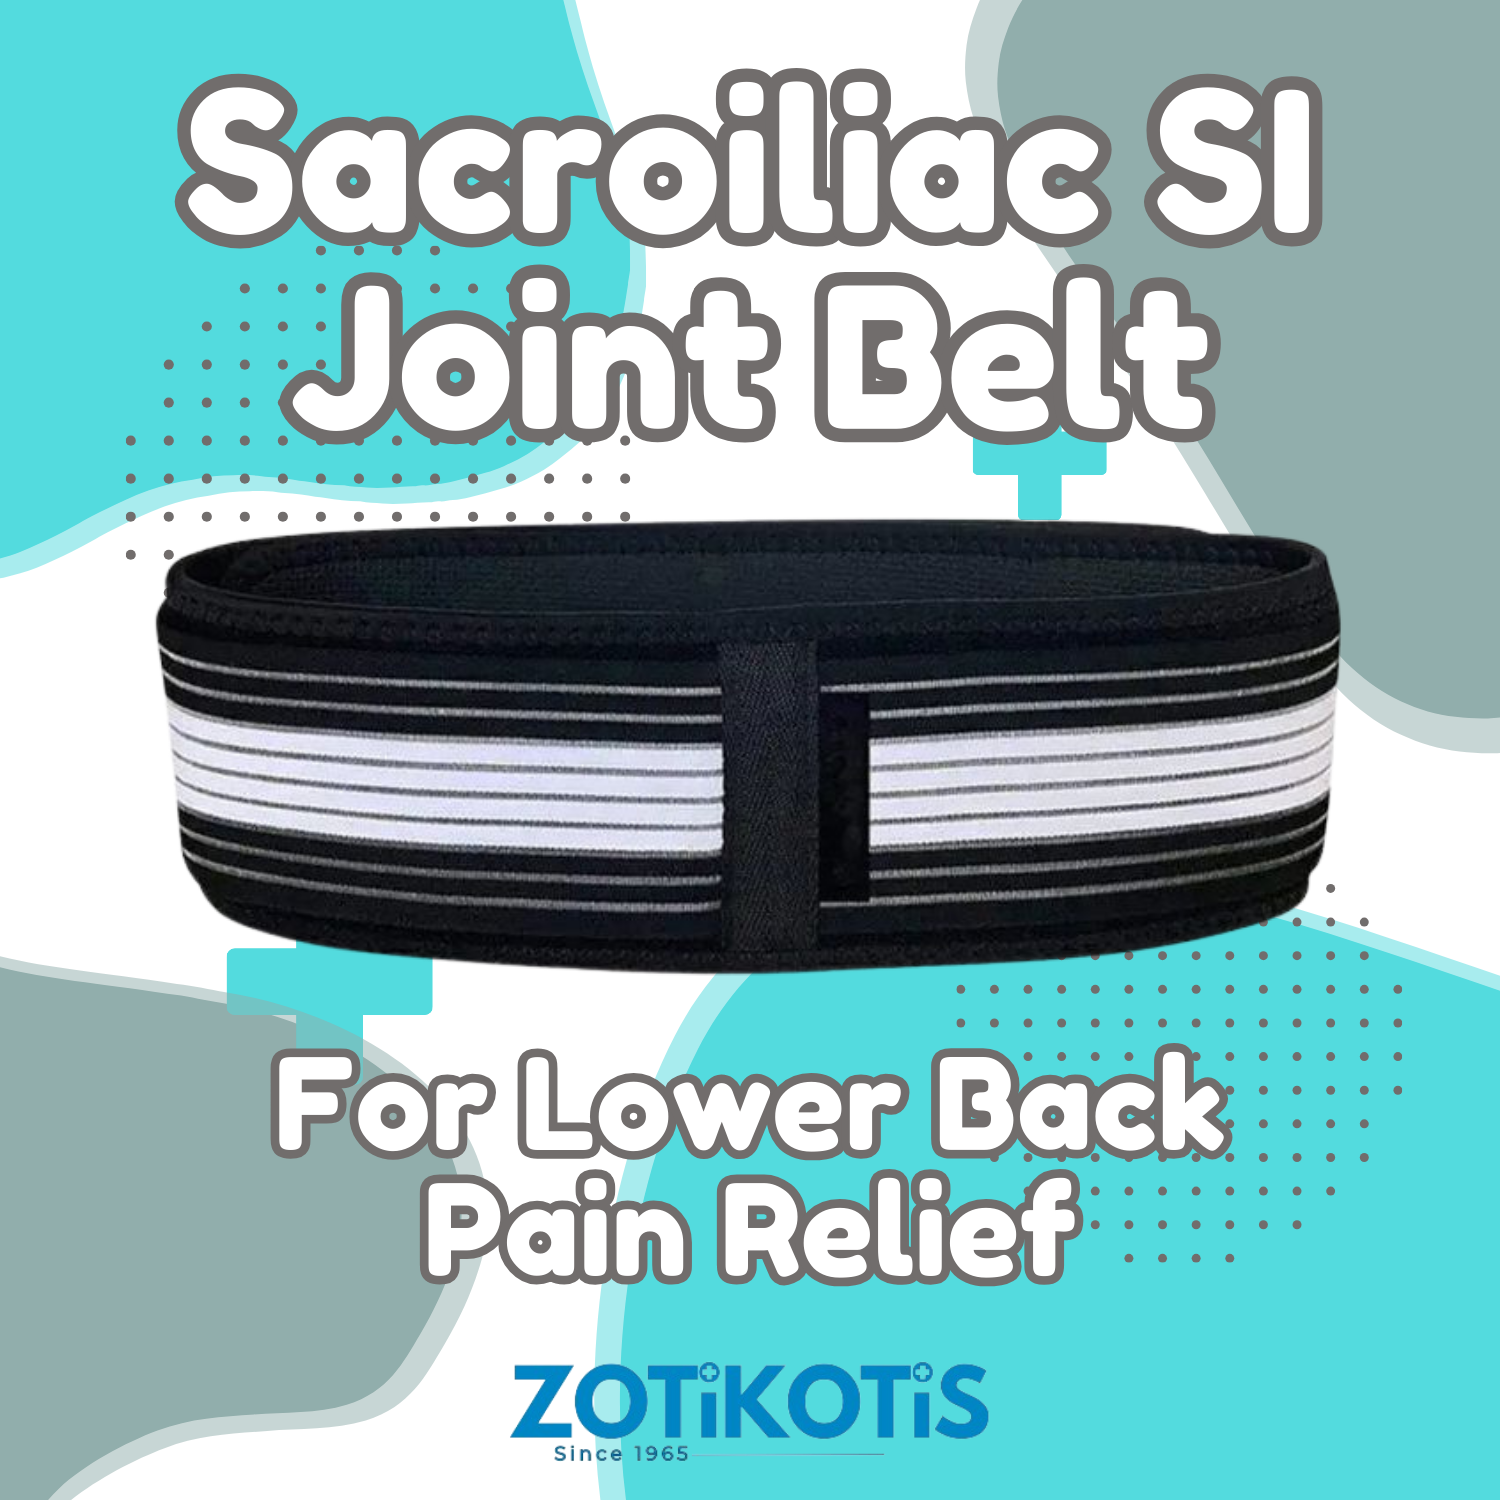 Sacroiliac SI Joint Belt For Lower Back Pain Relief-1